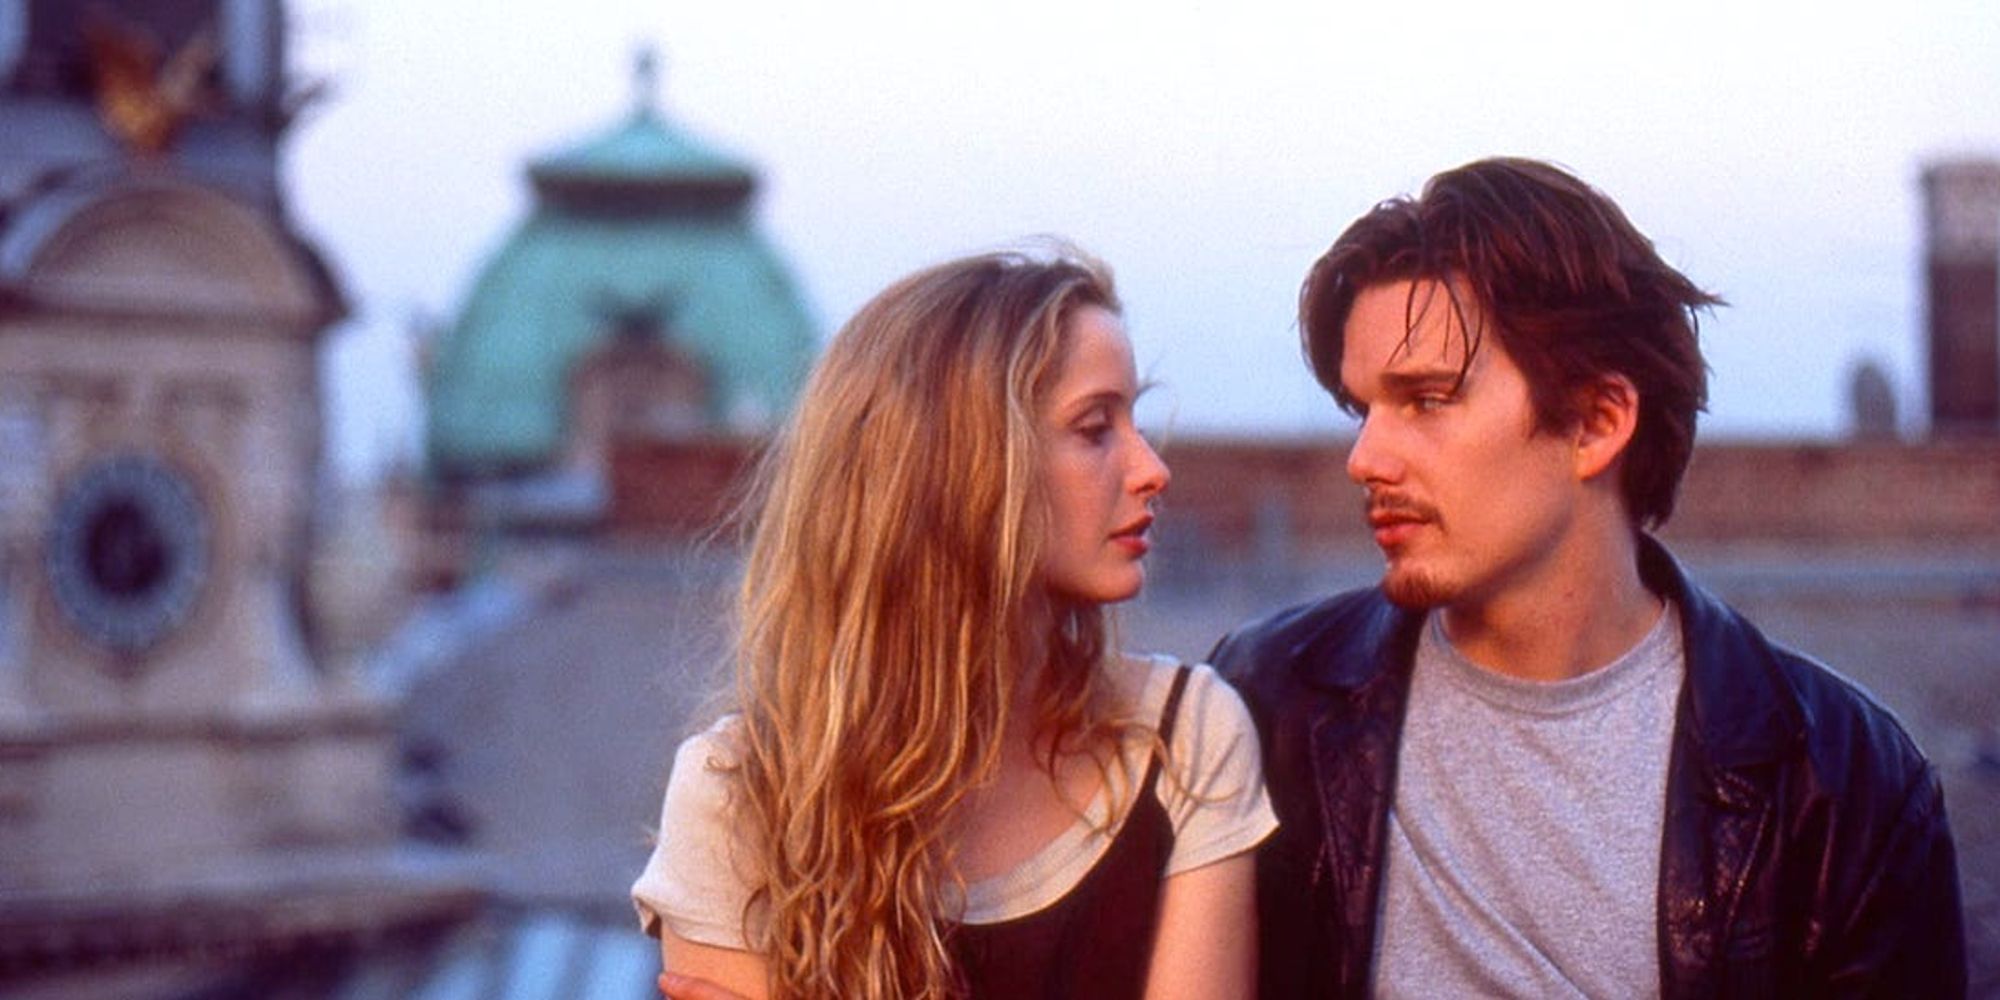 Celine and Jesse embracing and looking into each other's eyes in Before Sunrise